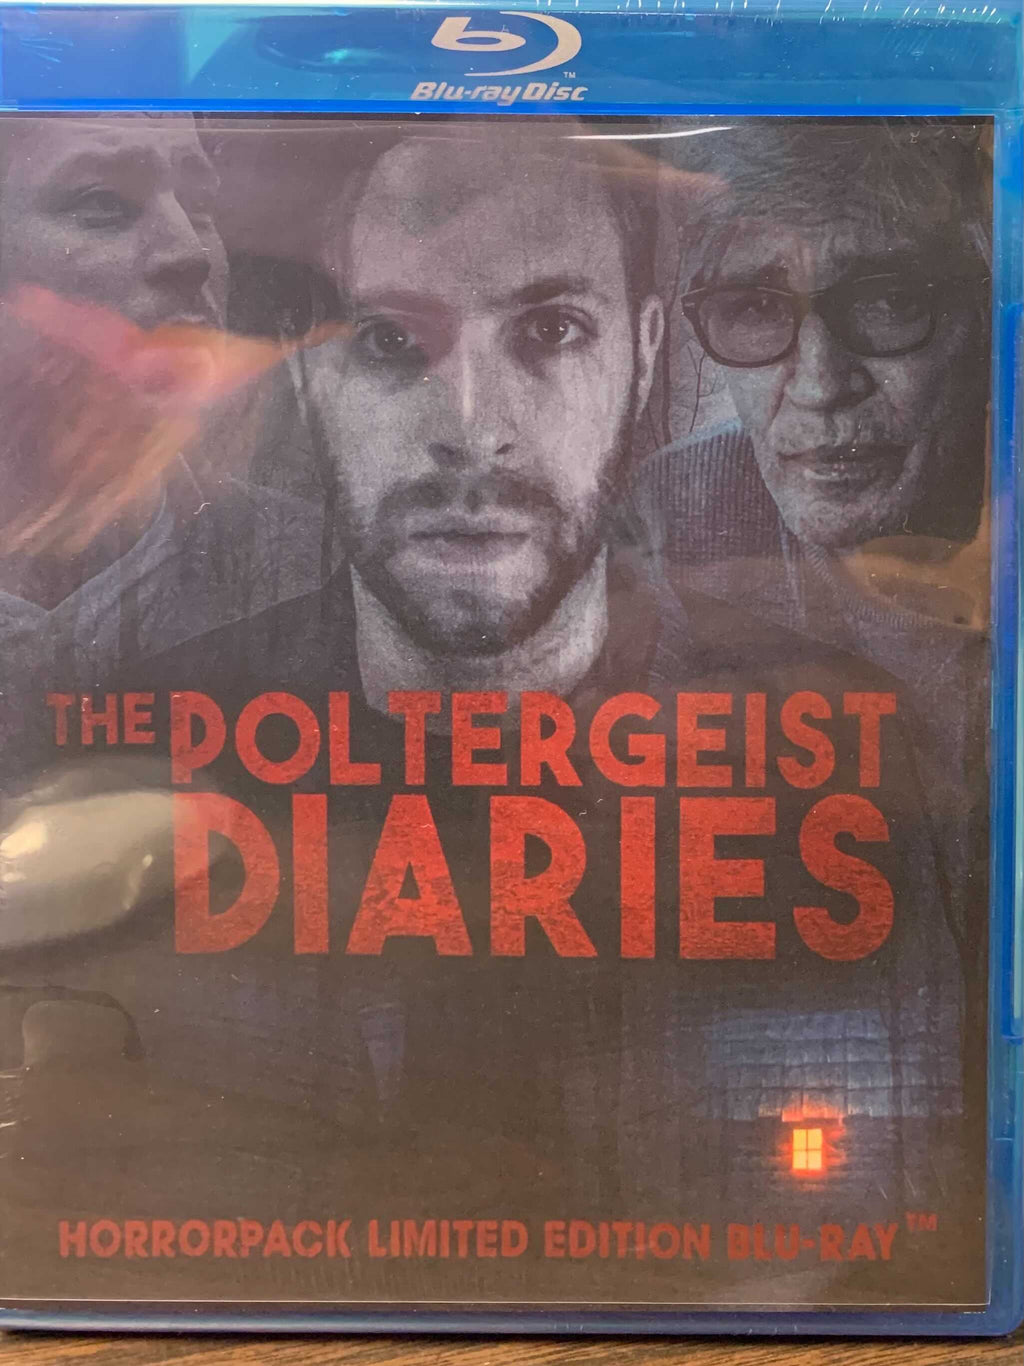 The Poltergeist Diaries - HorrorPack Limited Edition Blu-ray #60